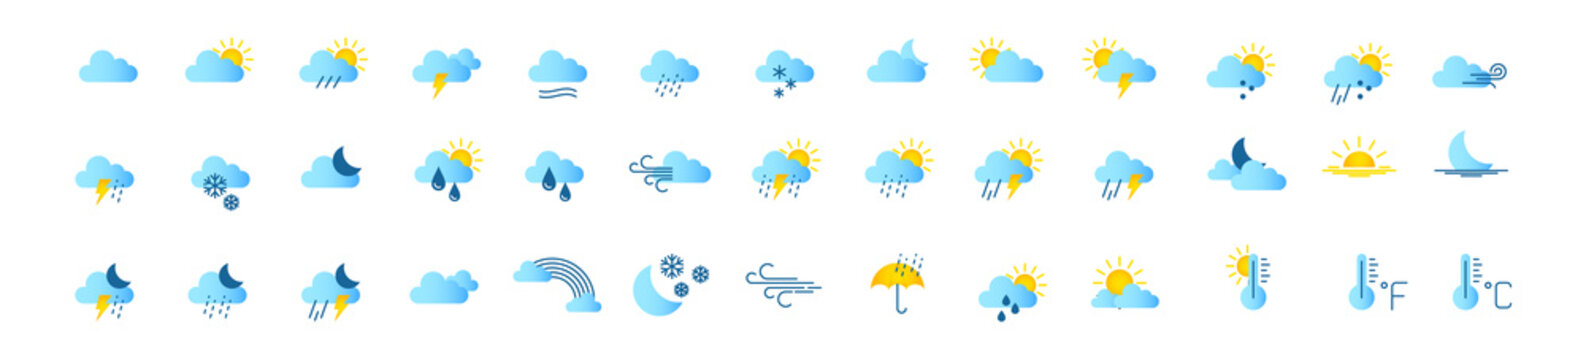 Set of weather icons in line style for web. Weather , clouds, wind, sun day, moon, snowflakes, sunny day